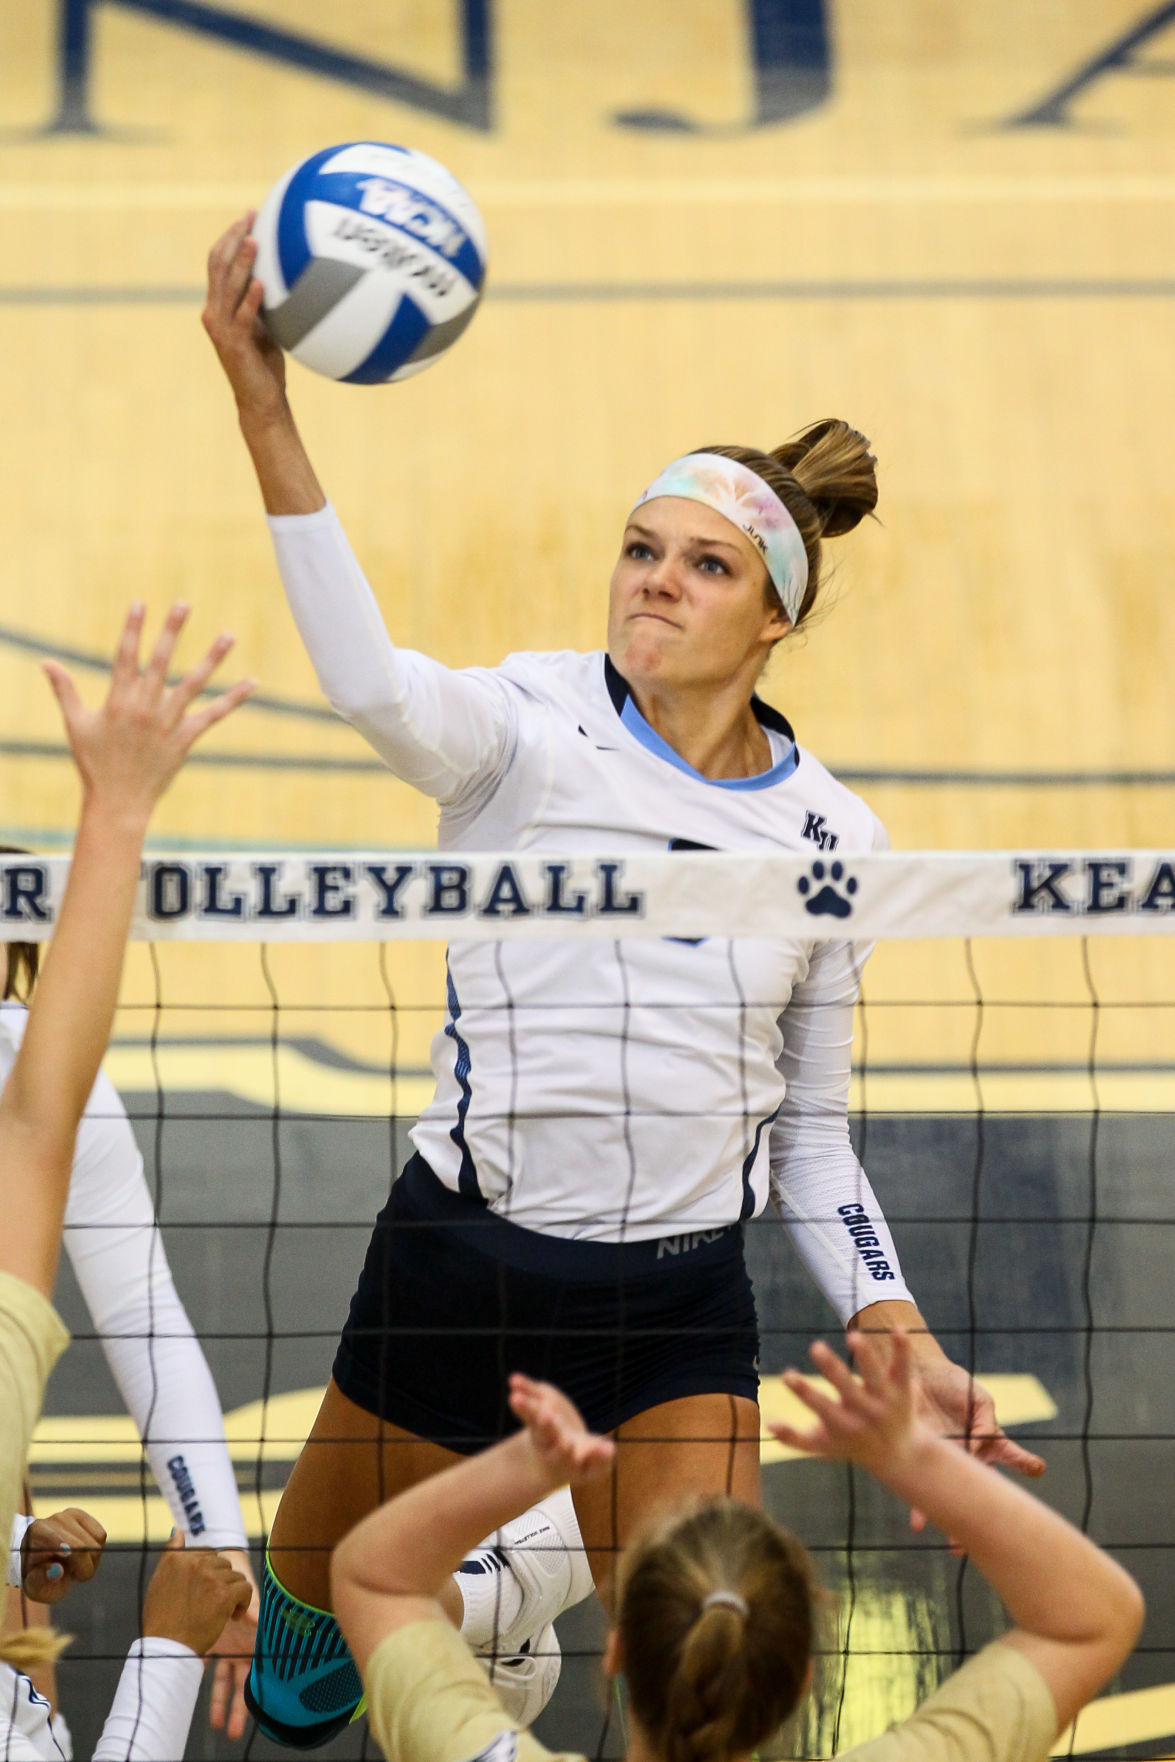 Ridgway helps Kean women's volleyball to NJAC title | South Jersey ...